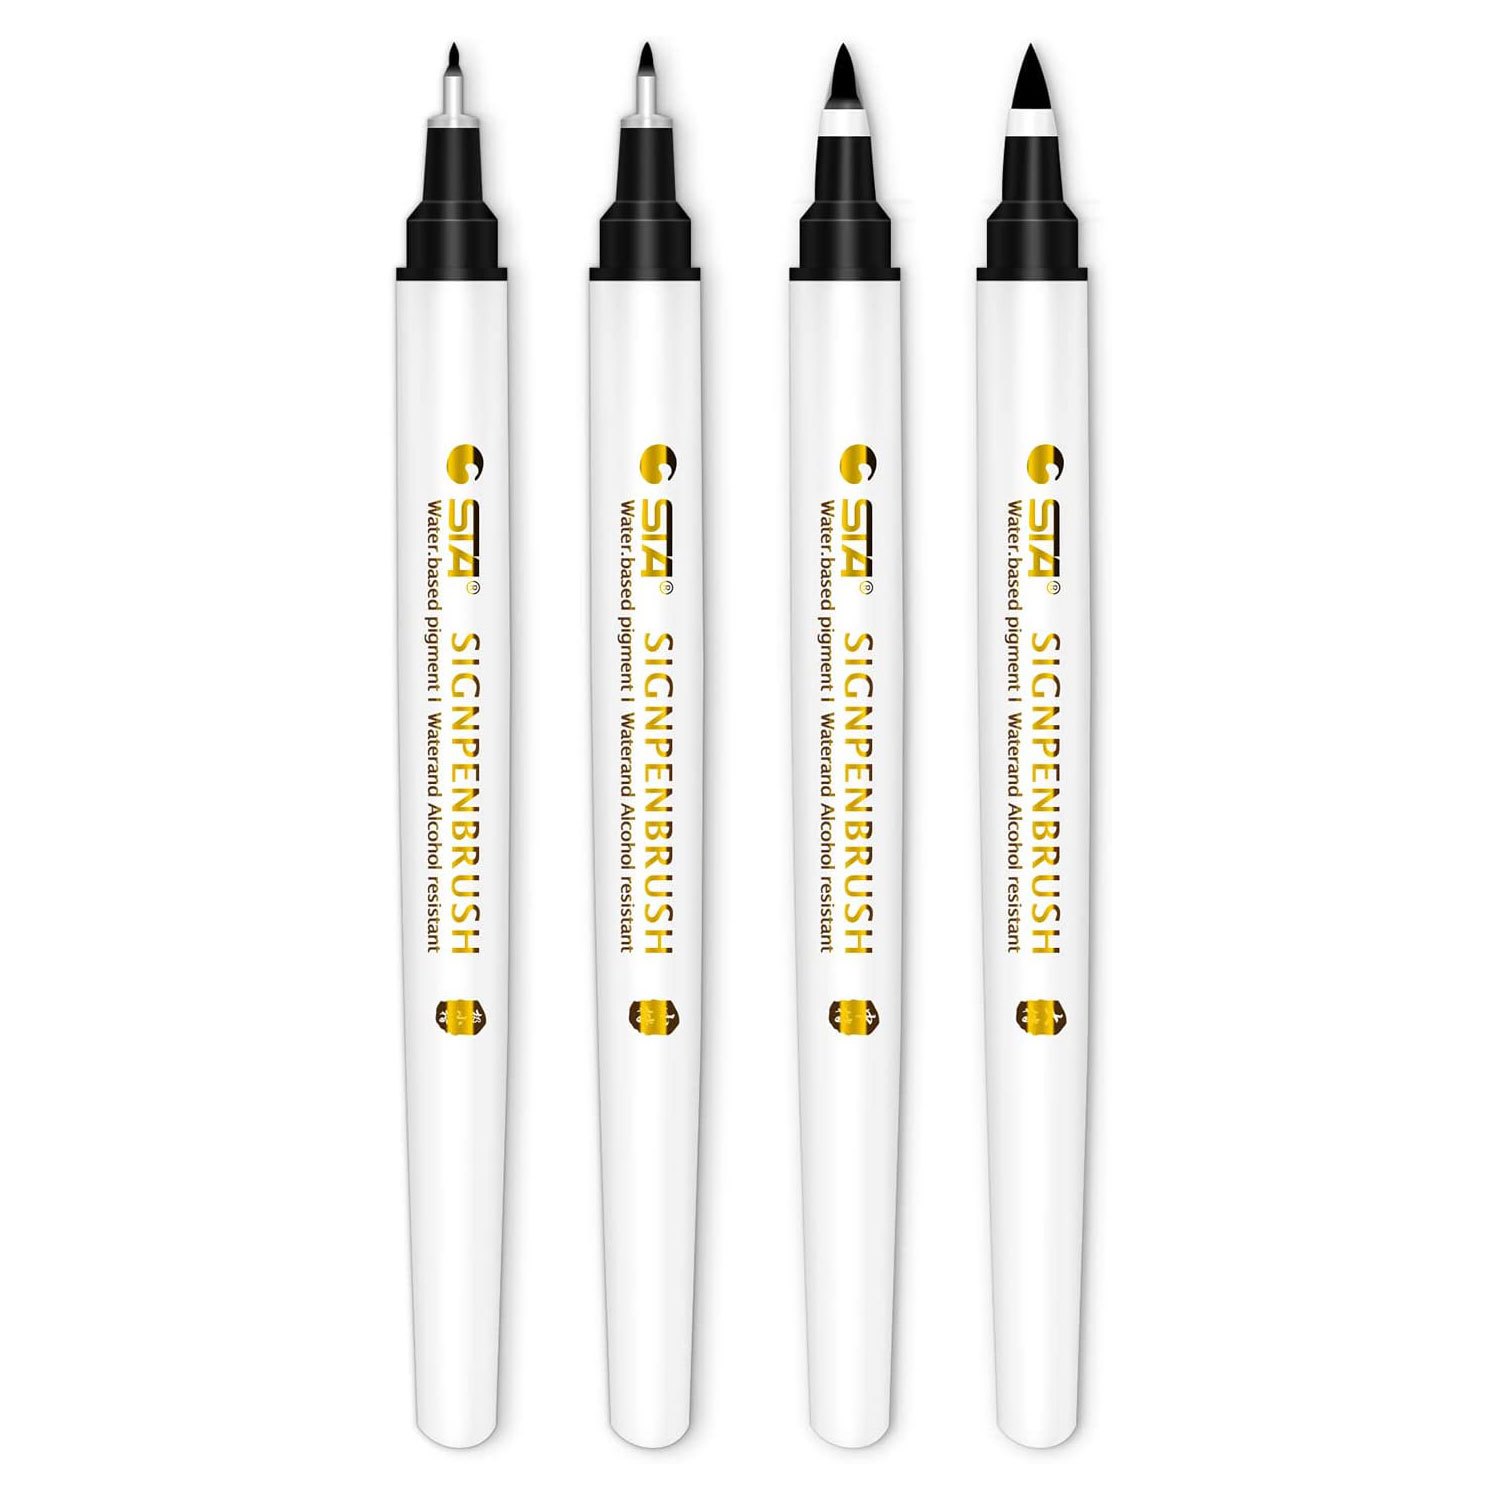 Hand Lettering Pens, Calligraphy Pens, Brush Markers, Soft and Hard Tip - 4  Pcs Black Ink Pen Set for Beginners Writing, Art Drawing, Sketching, Water